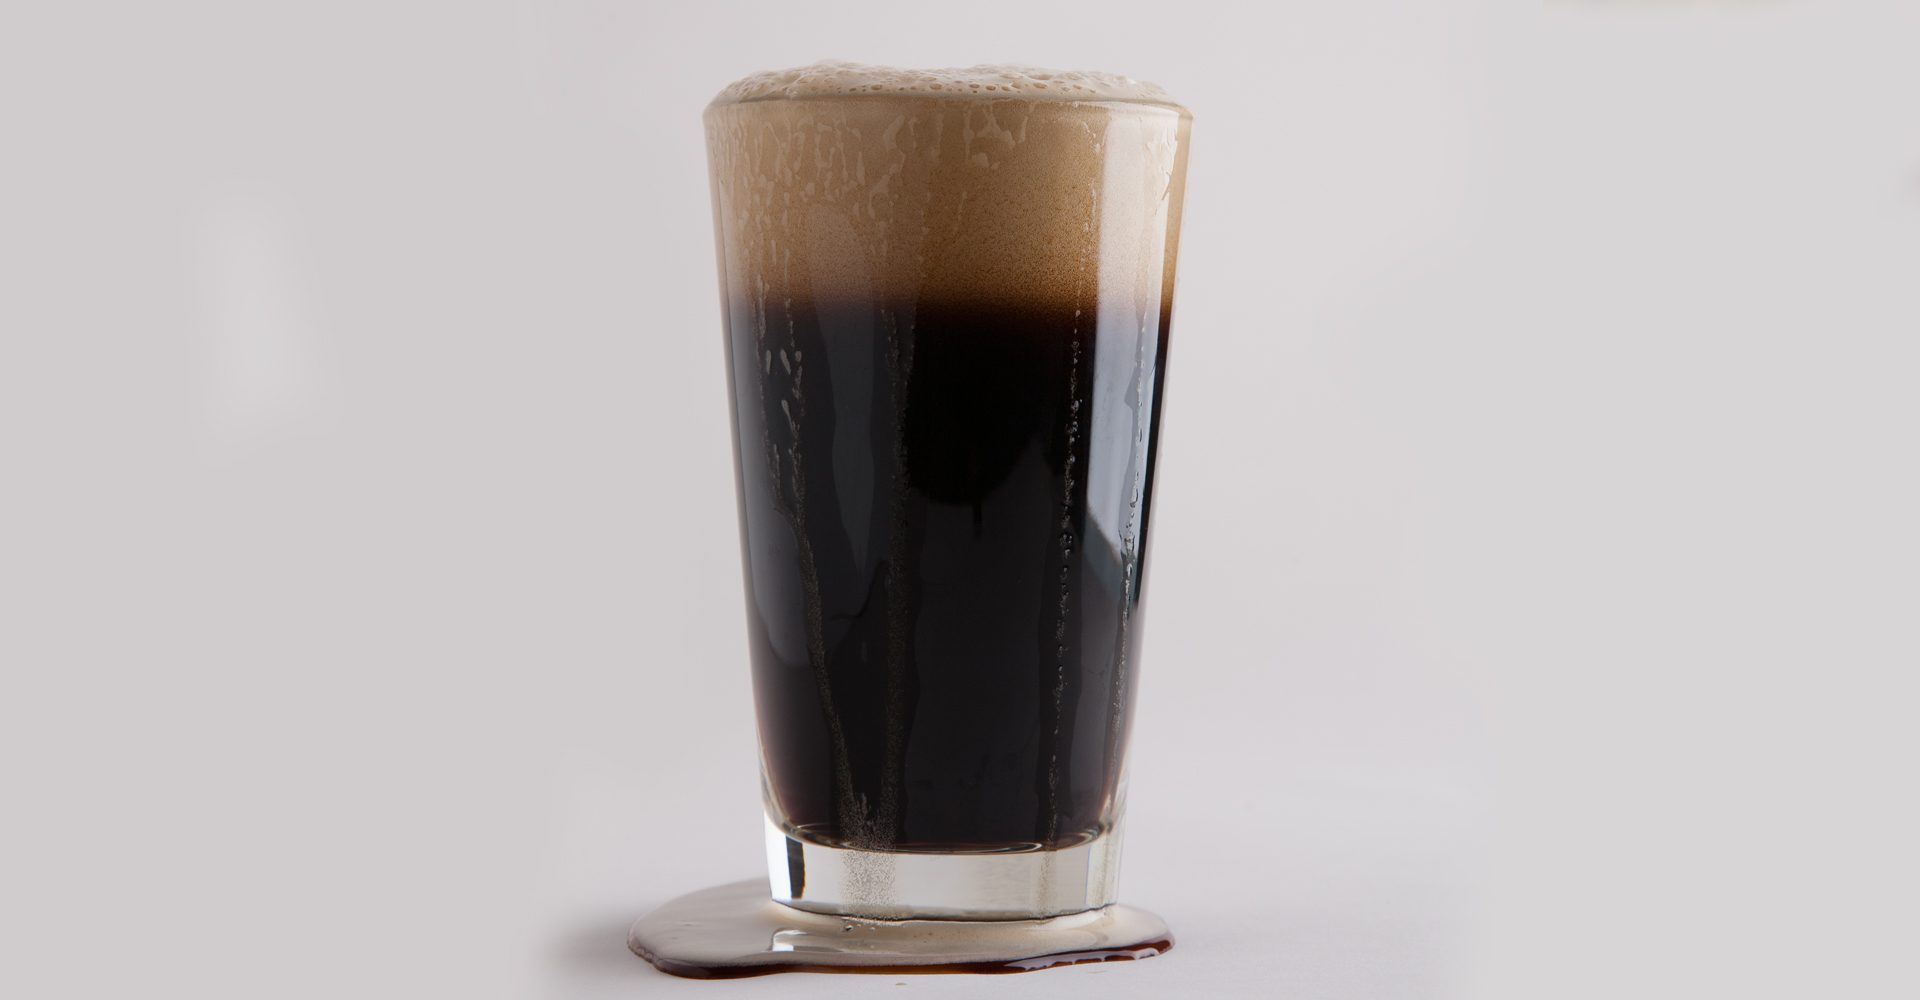 5 Craft Brewers’ Favorite Irish Stouts For St. Patrick’s Day